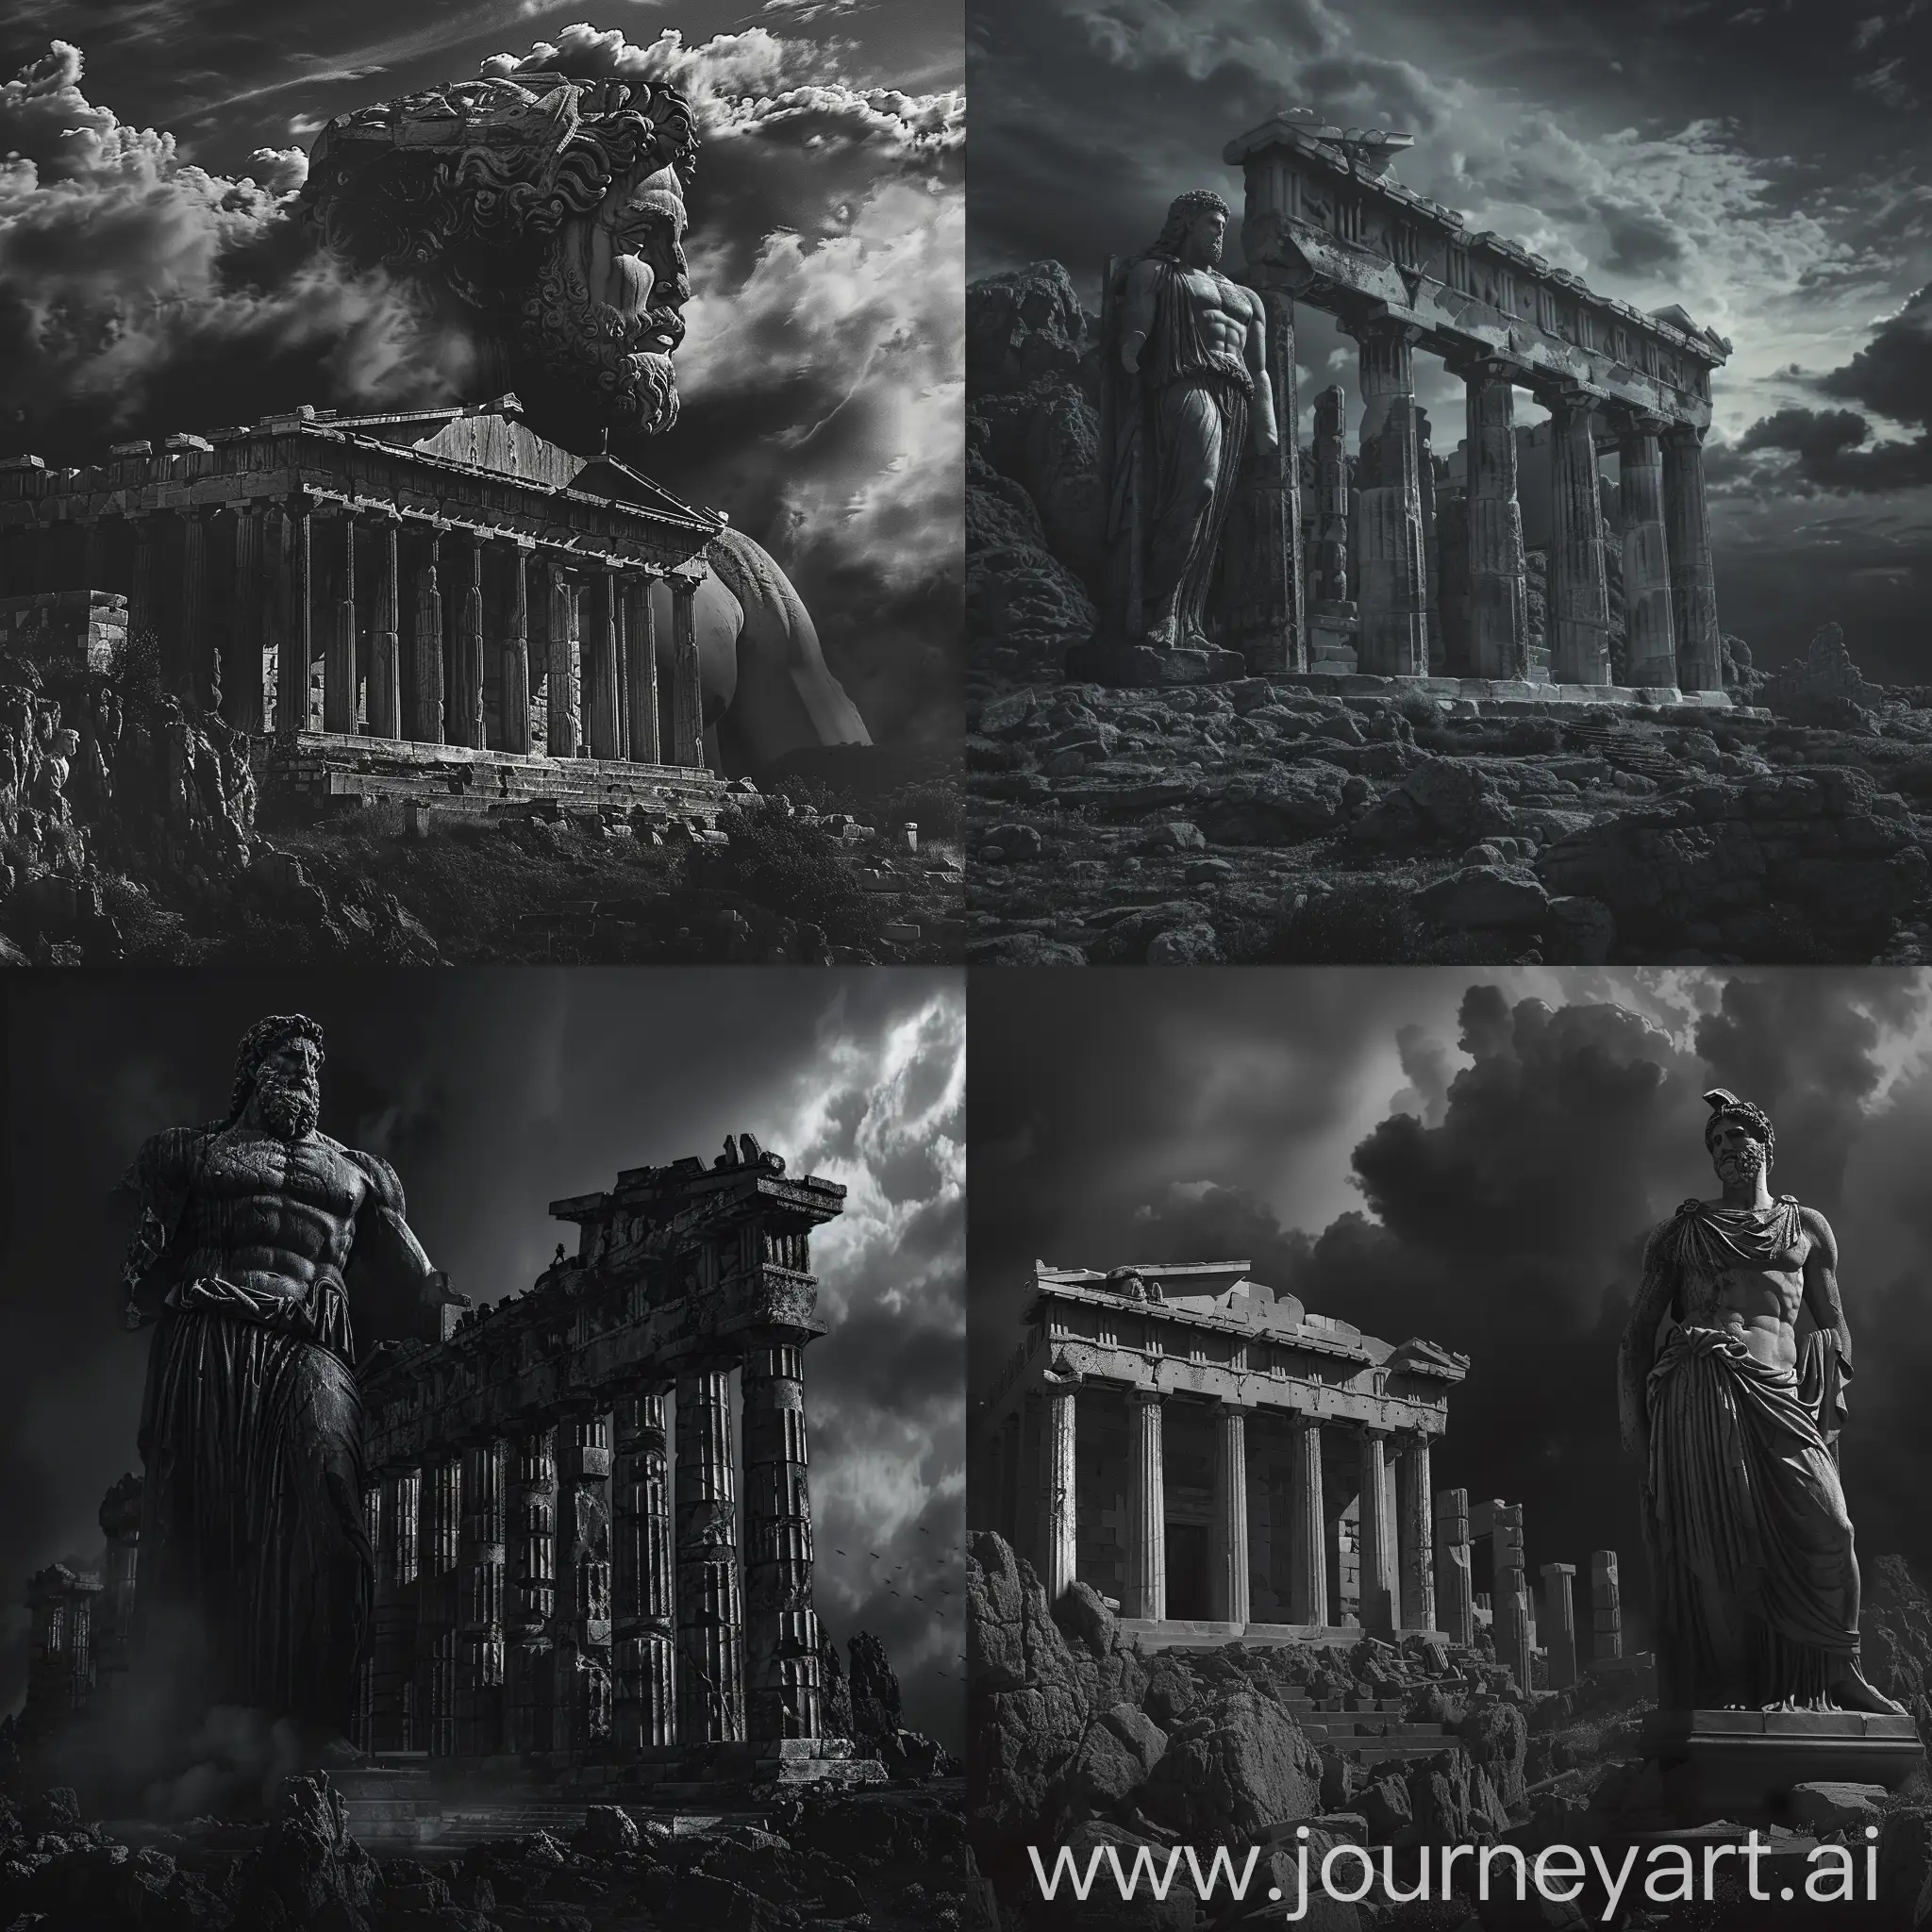 Stoic-Greek-Society-Ancient-Architecture-and-Iconic-Statue-in-Monochrome